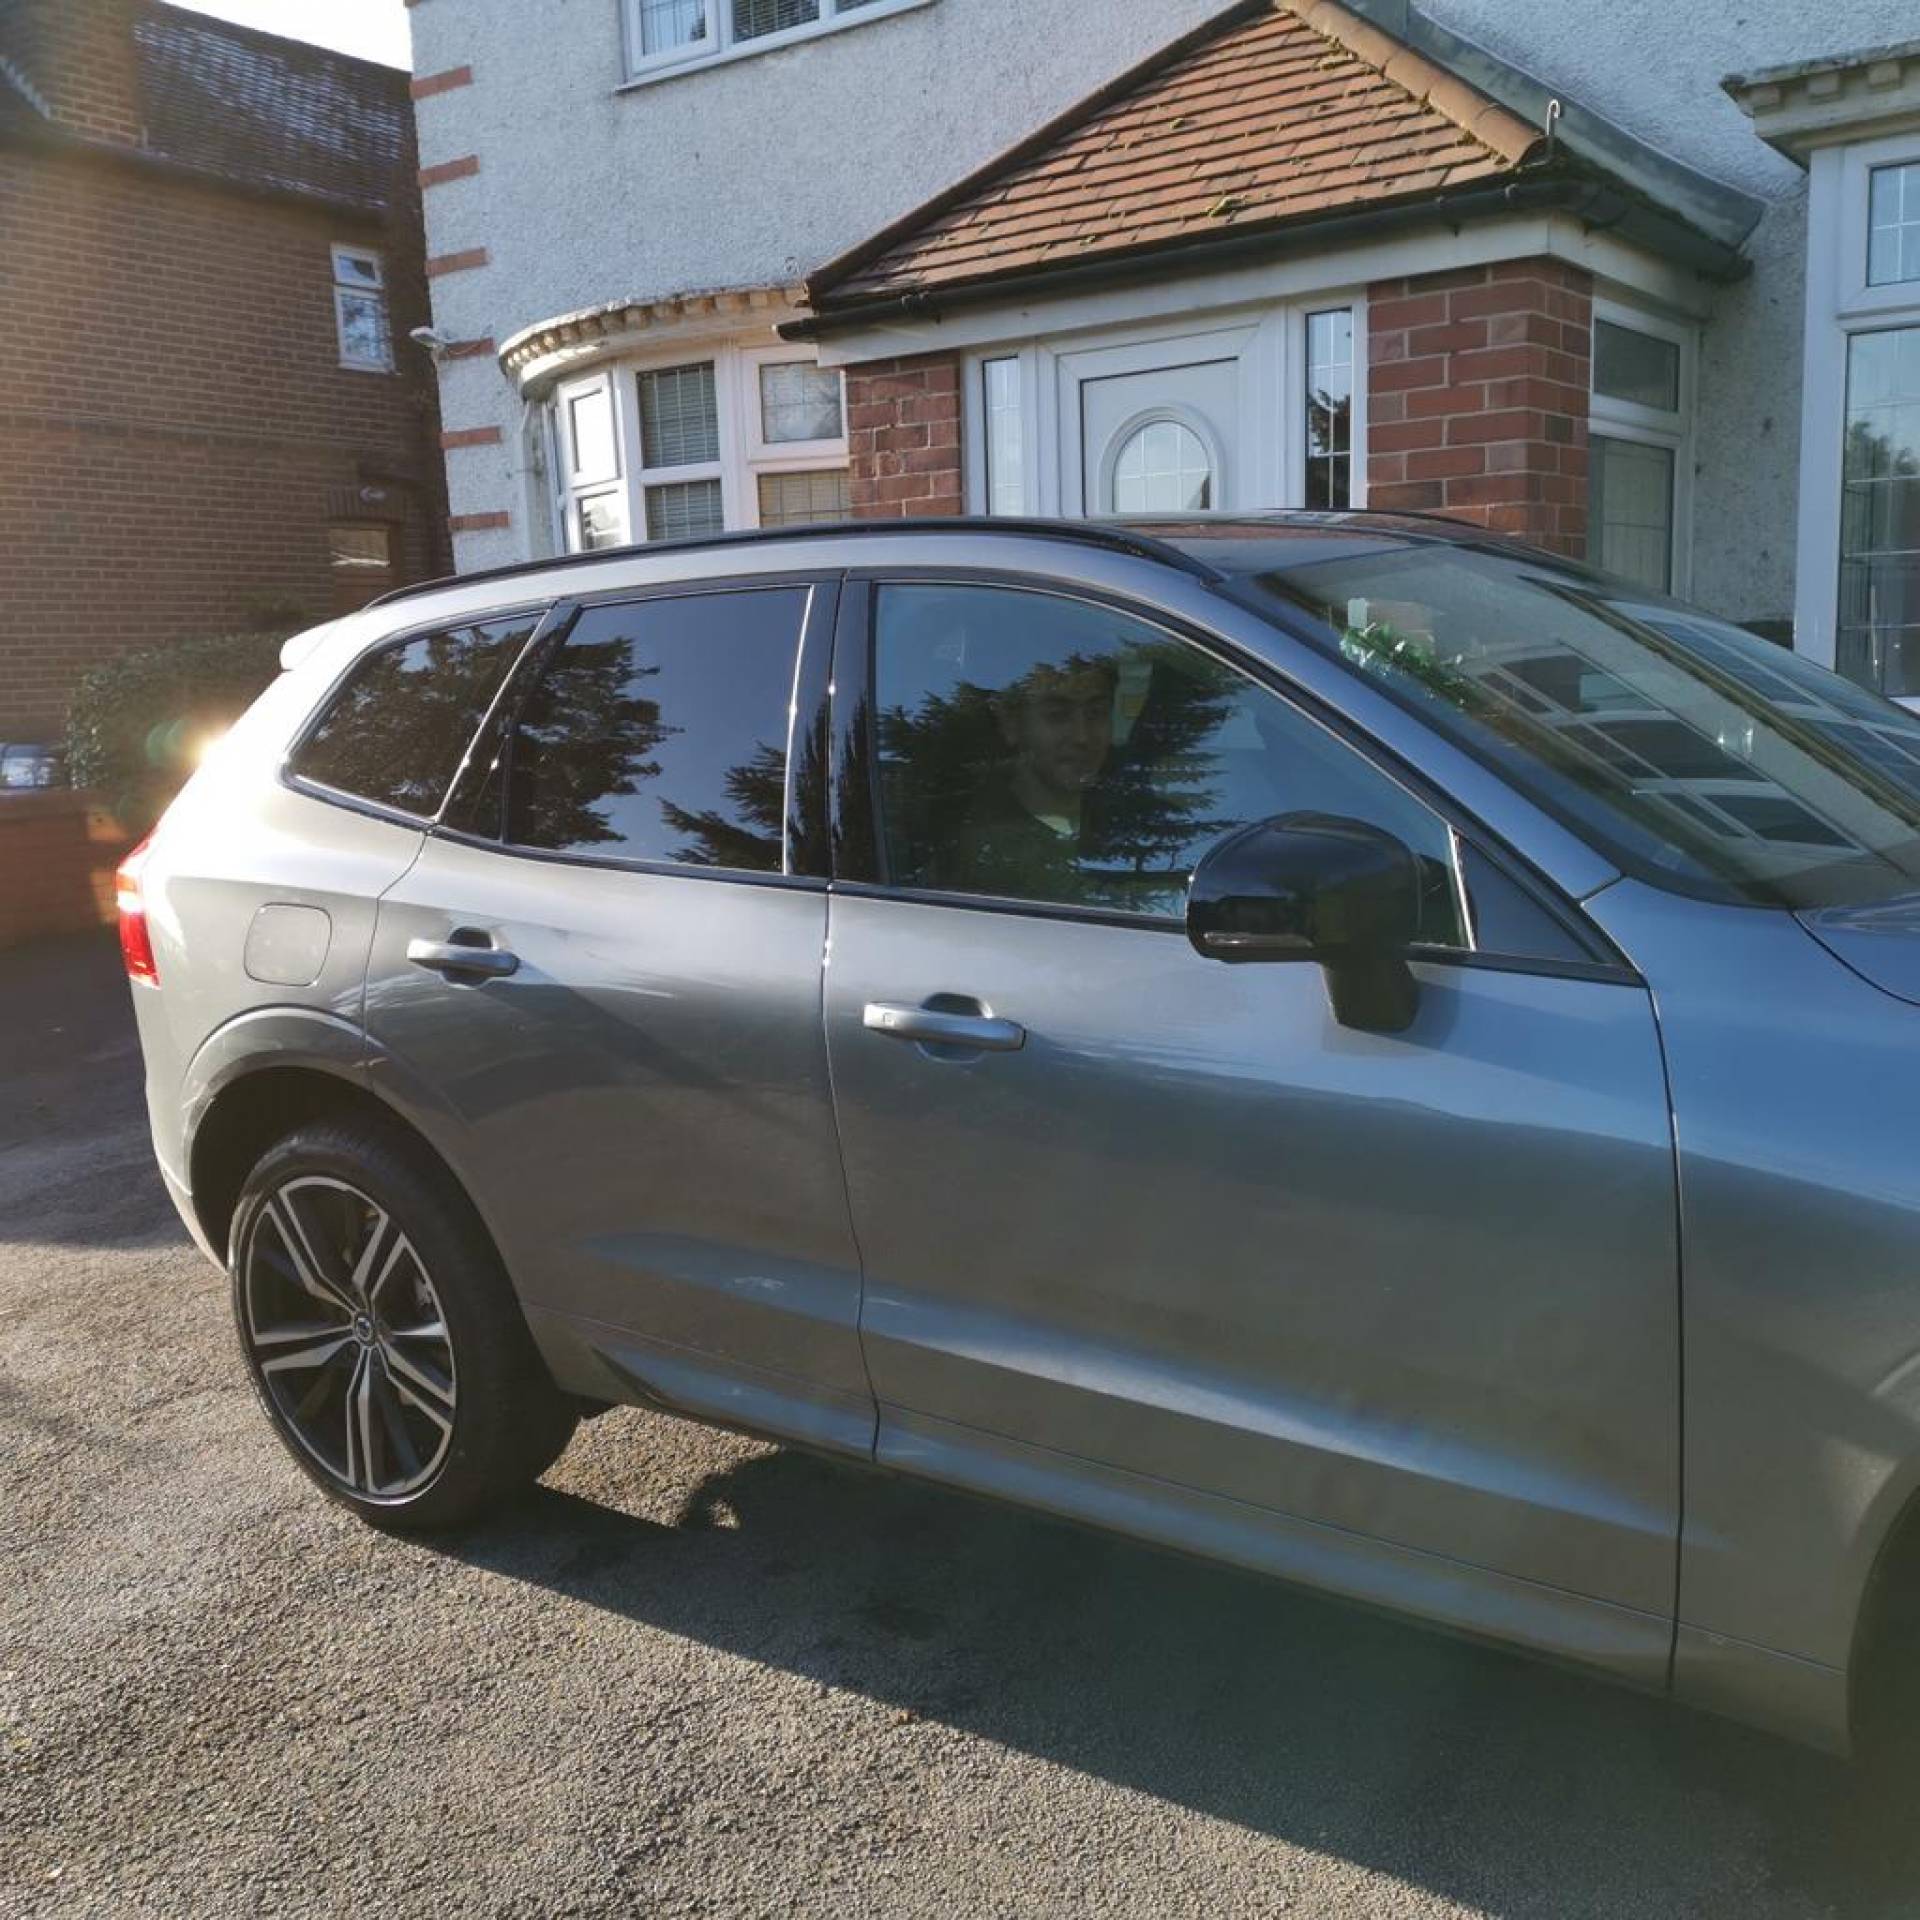 New Volvo XC60 Estate Review